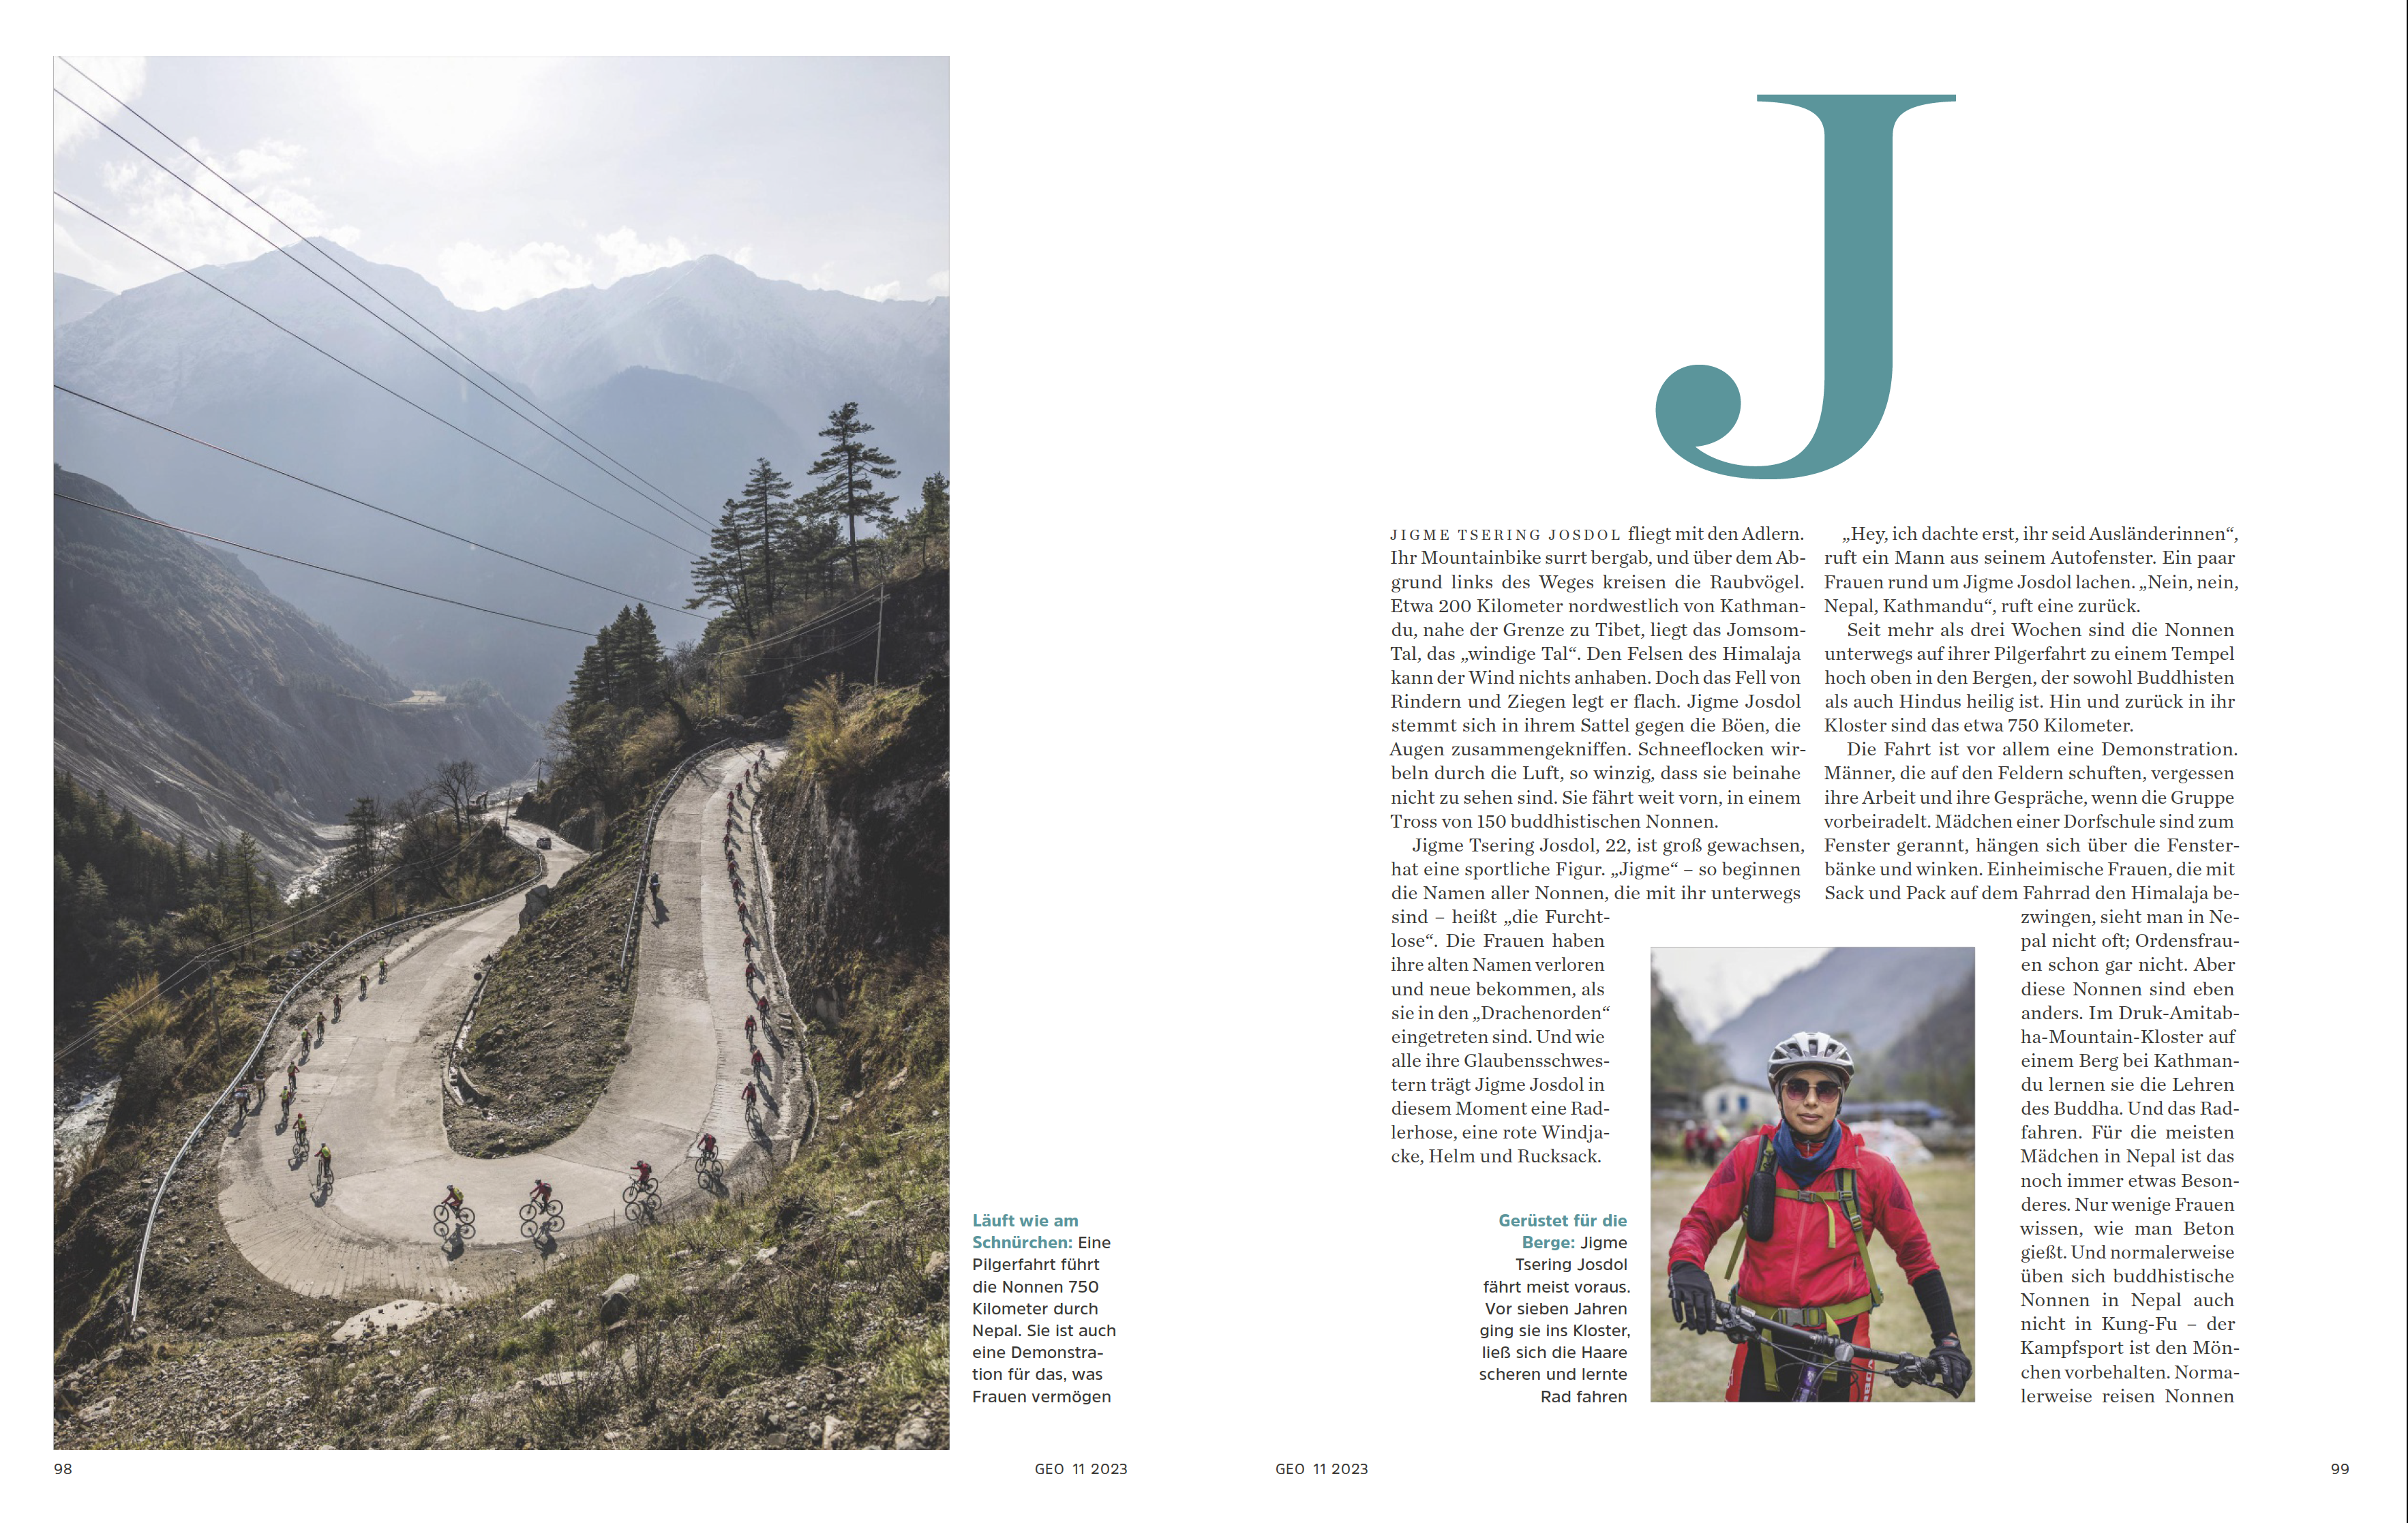 GEO magazine publication of my long-term project about the fearless Kung Fu Nuns of the Himalayas